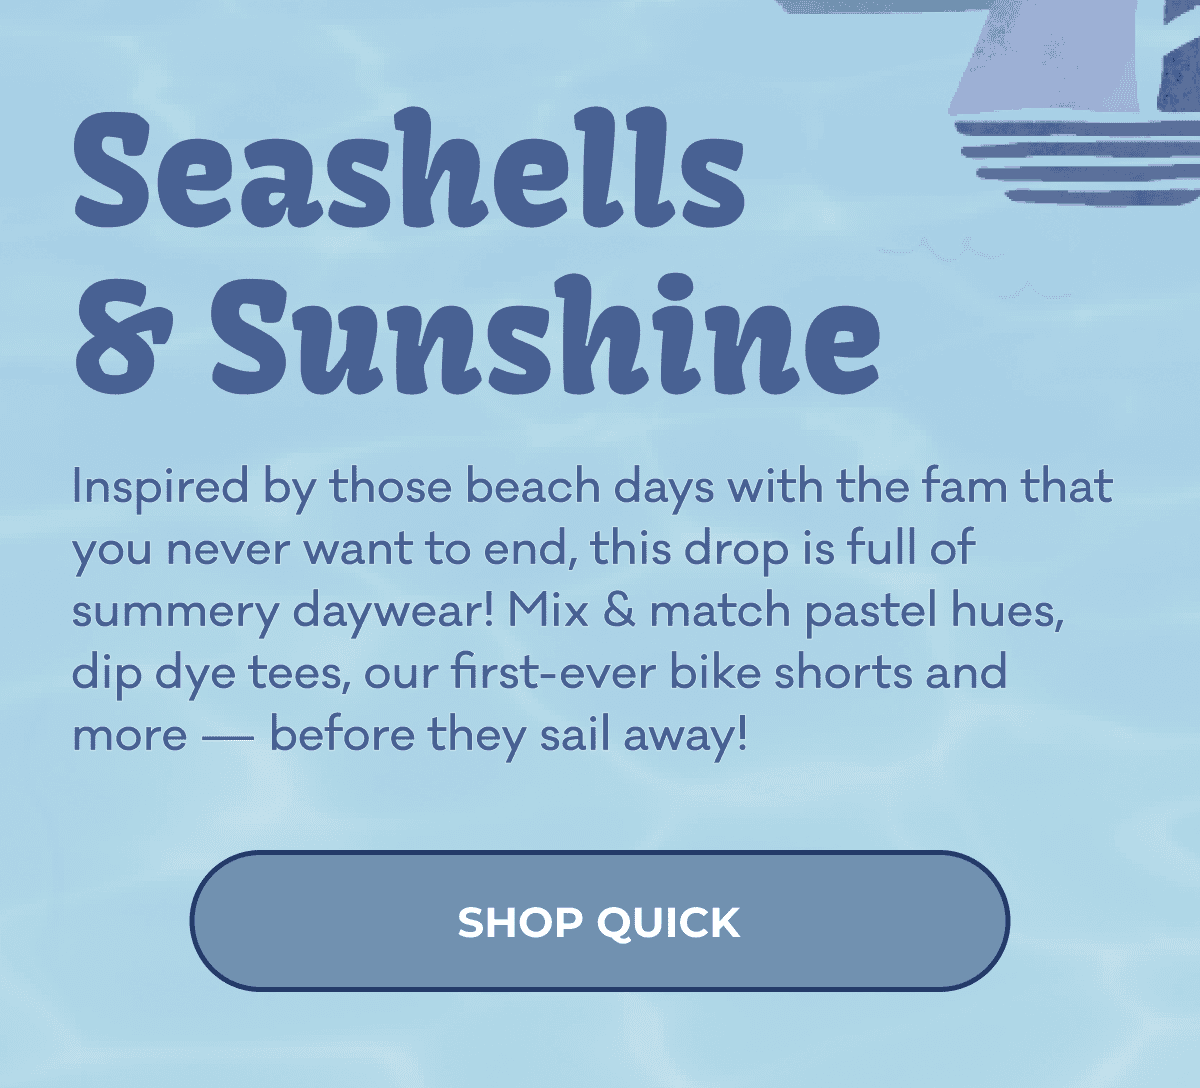 Seashells & Sunshine | Inspired by those beach days with the fam that you never want to end, this drop is full of summery daywear! Mix & match pastel hues, dip dye tees, our first-ever bike shorts and more — before they sail away! | SHOP QUICK